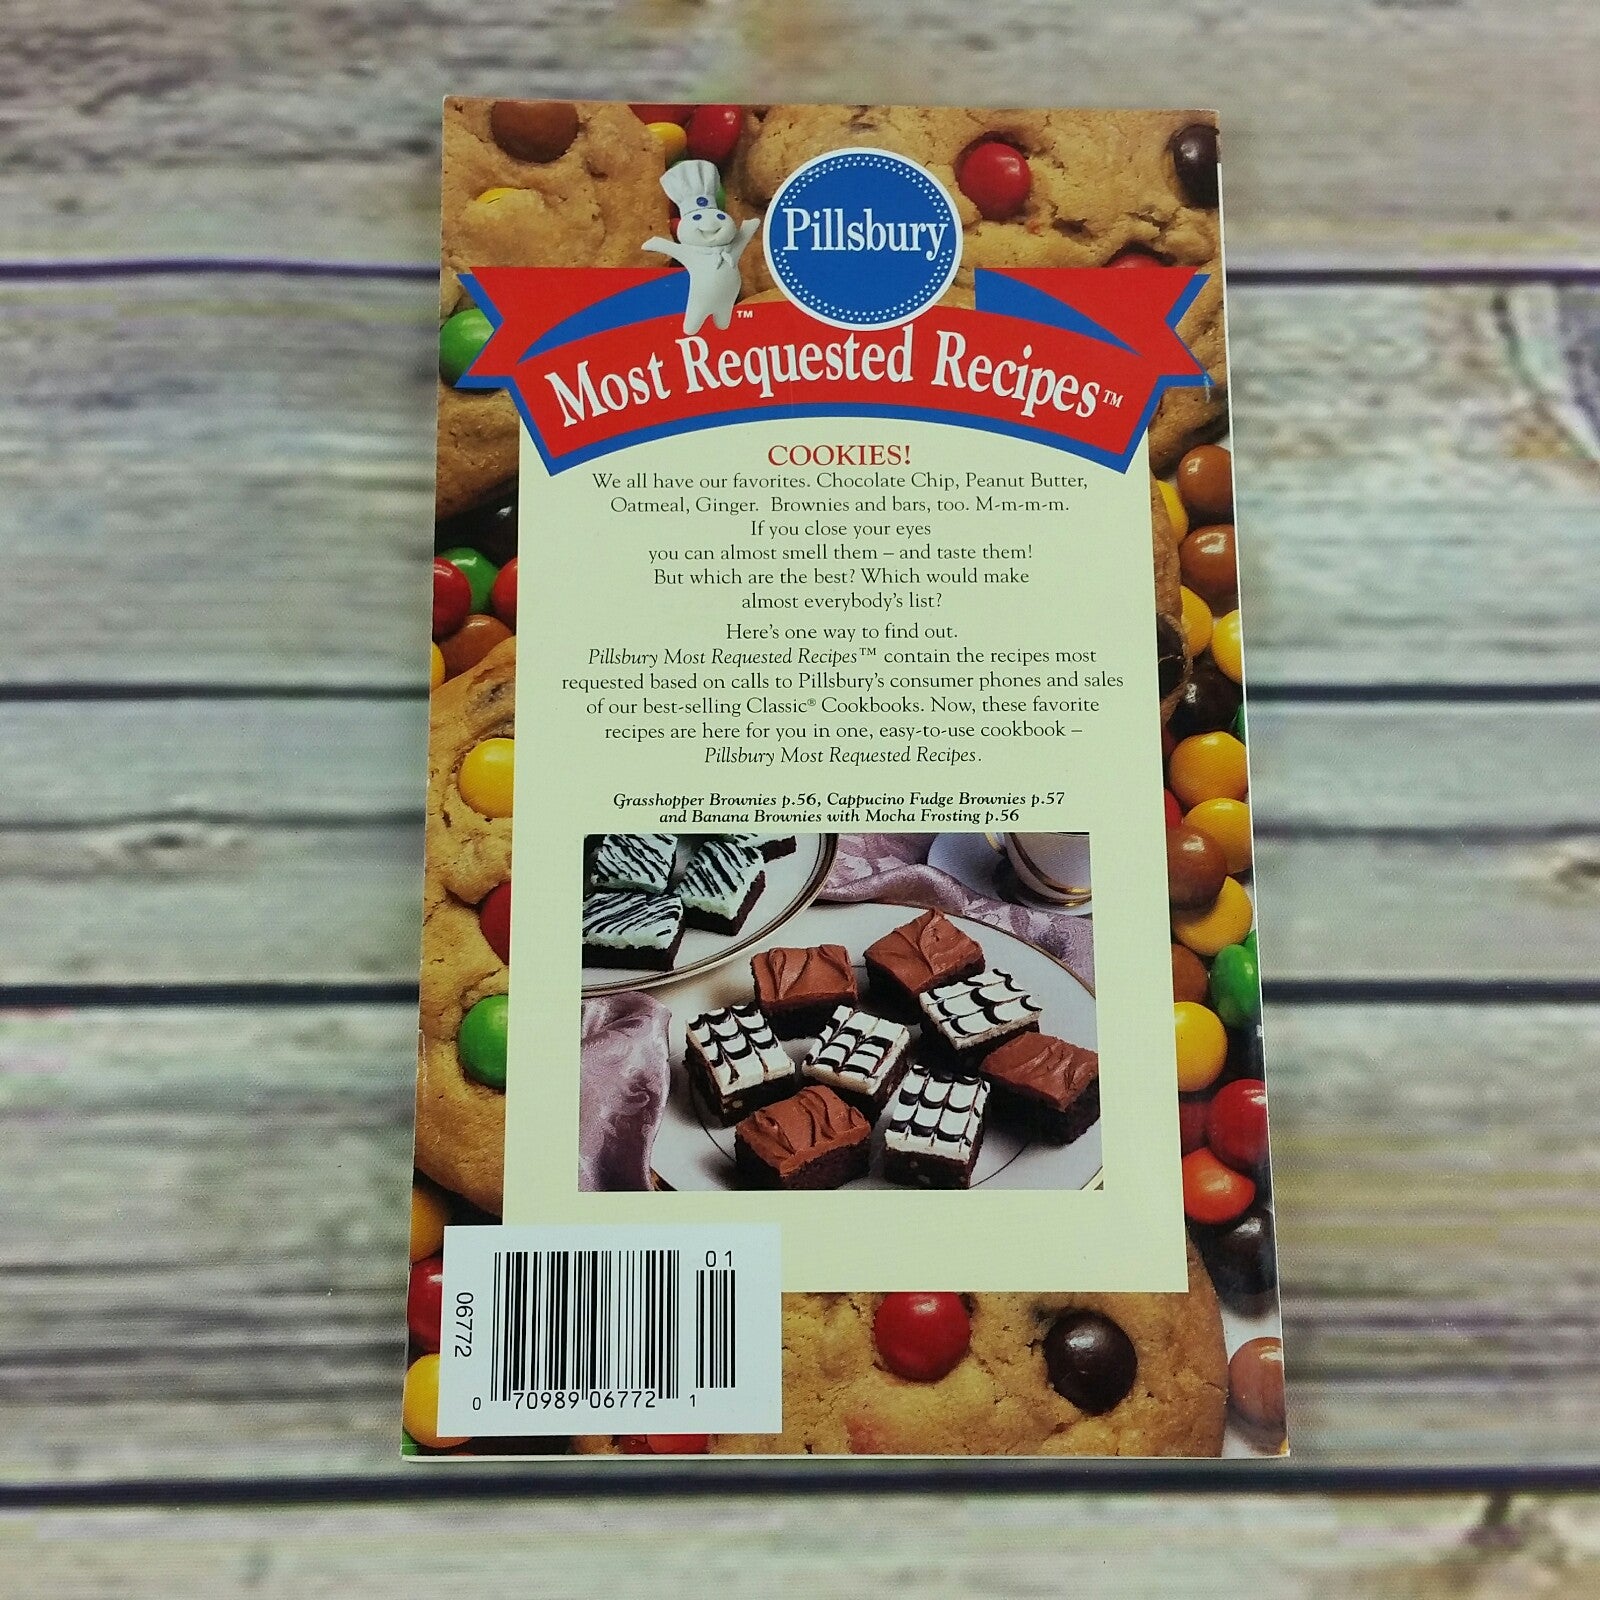 Vintage Pillsbury Cookbook Cookies Most Requested Recipes 1993 Paperback Booklet - At Grandma's Table